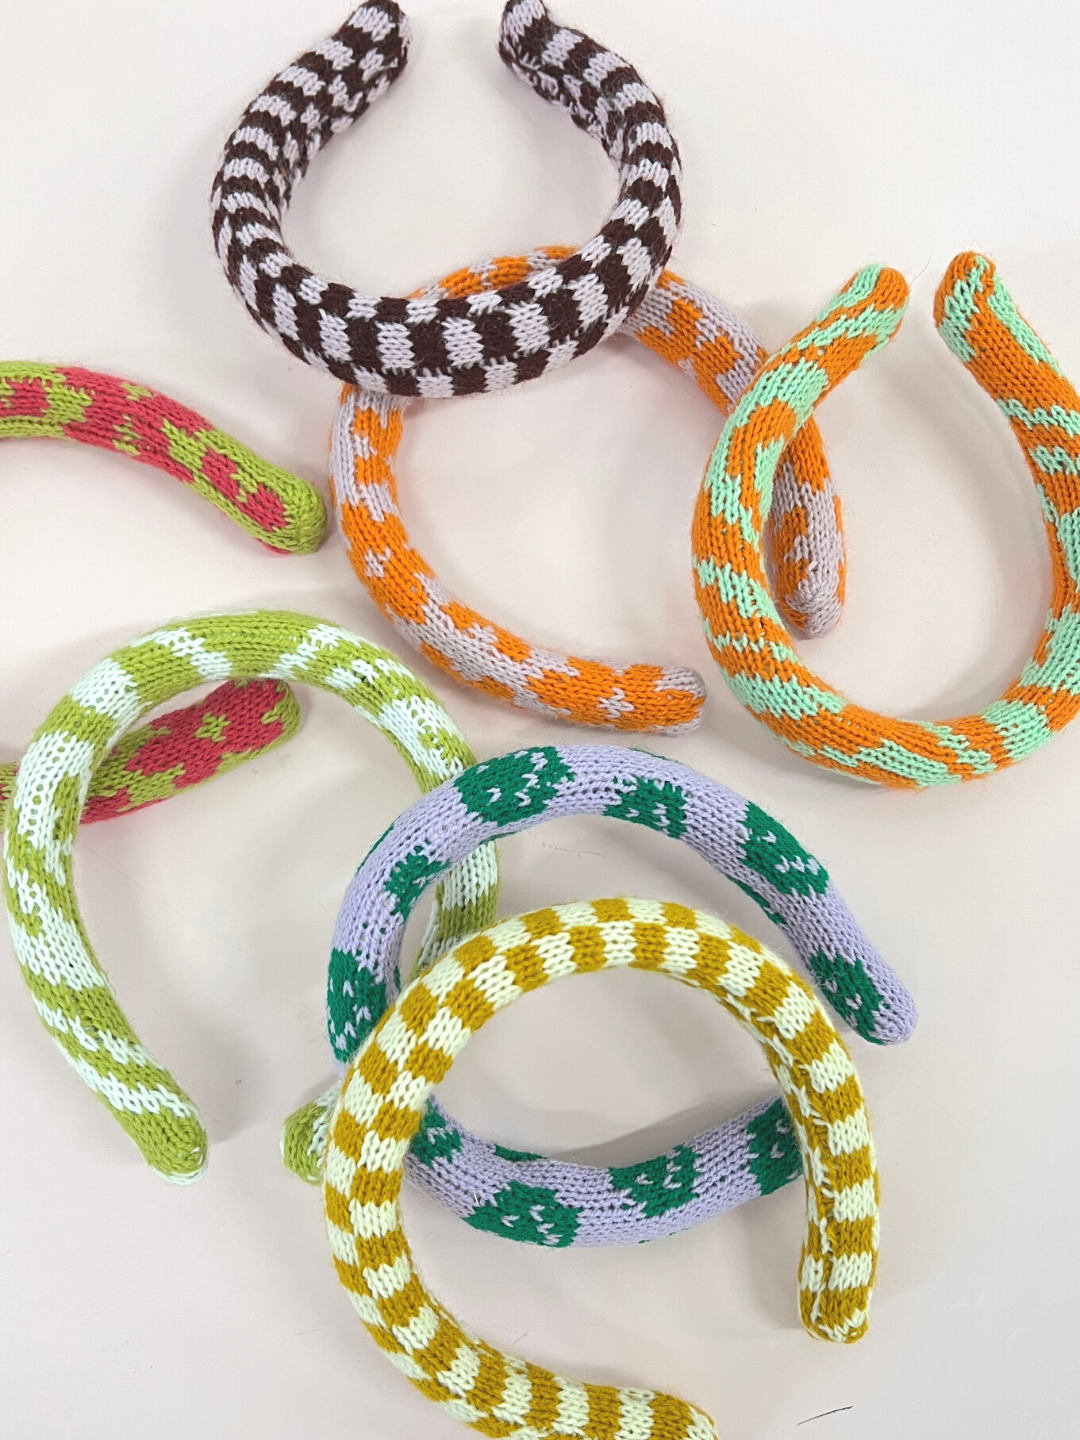 A collection of kids' knitted headbands in various colors and patterns